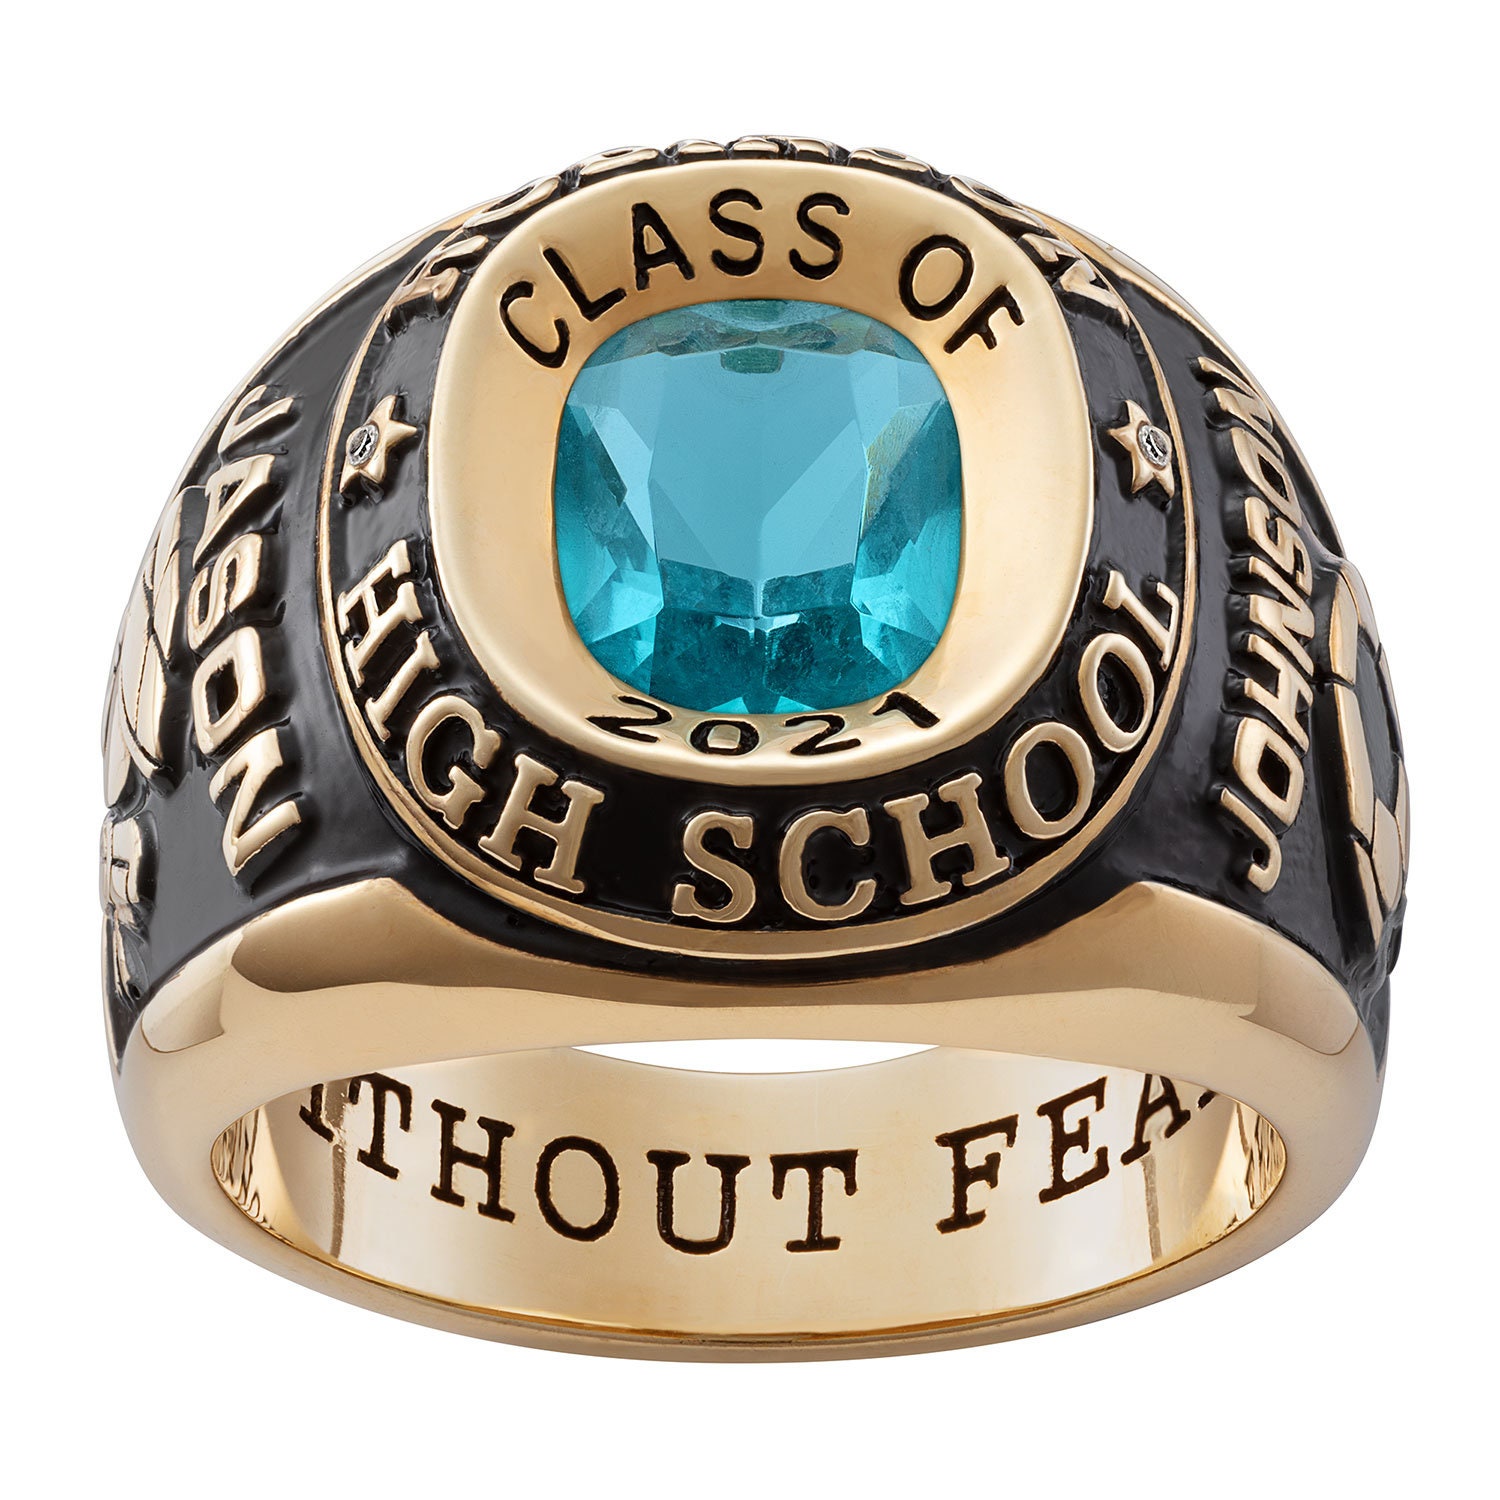 Officially Licensed College Rings | Balfour